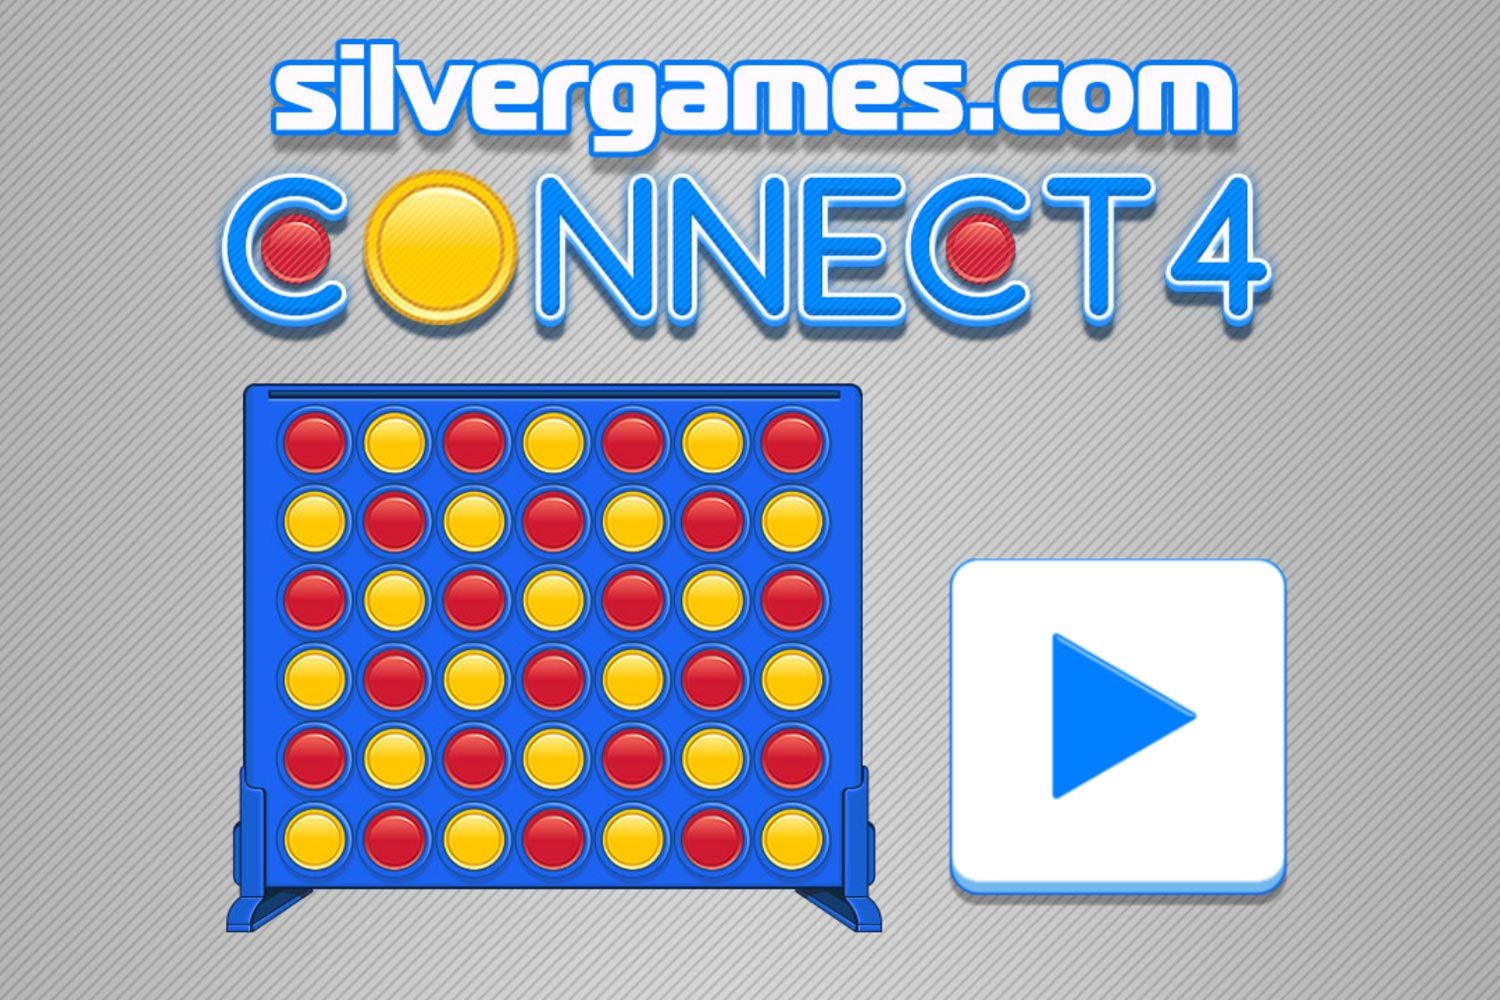 Tic-Tac-Toe 2 3 4 Player - Play Online on SilverGames 🕹️